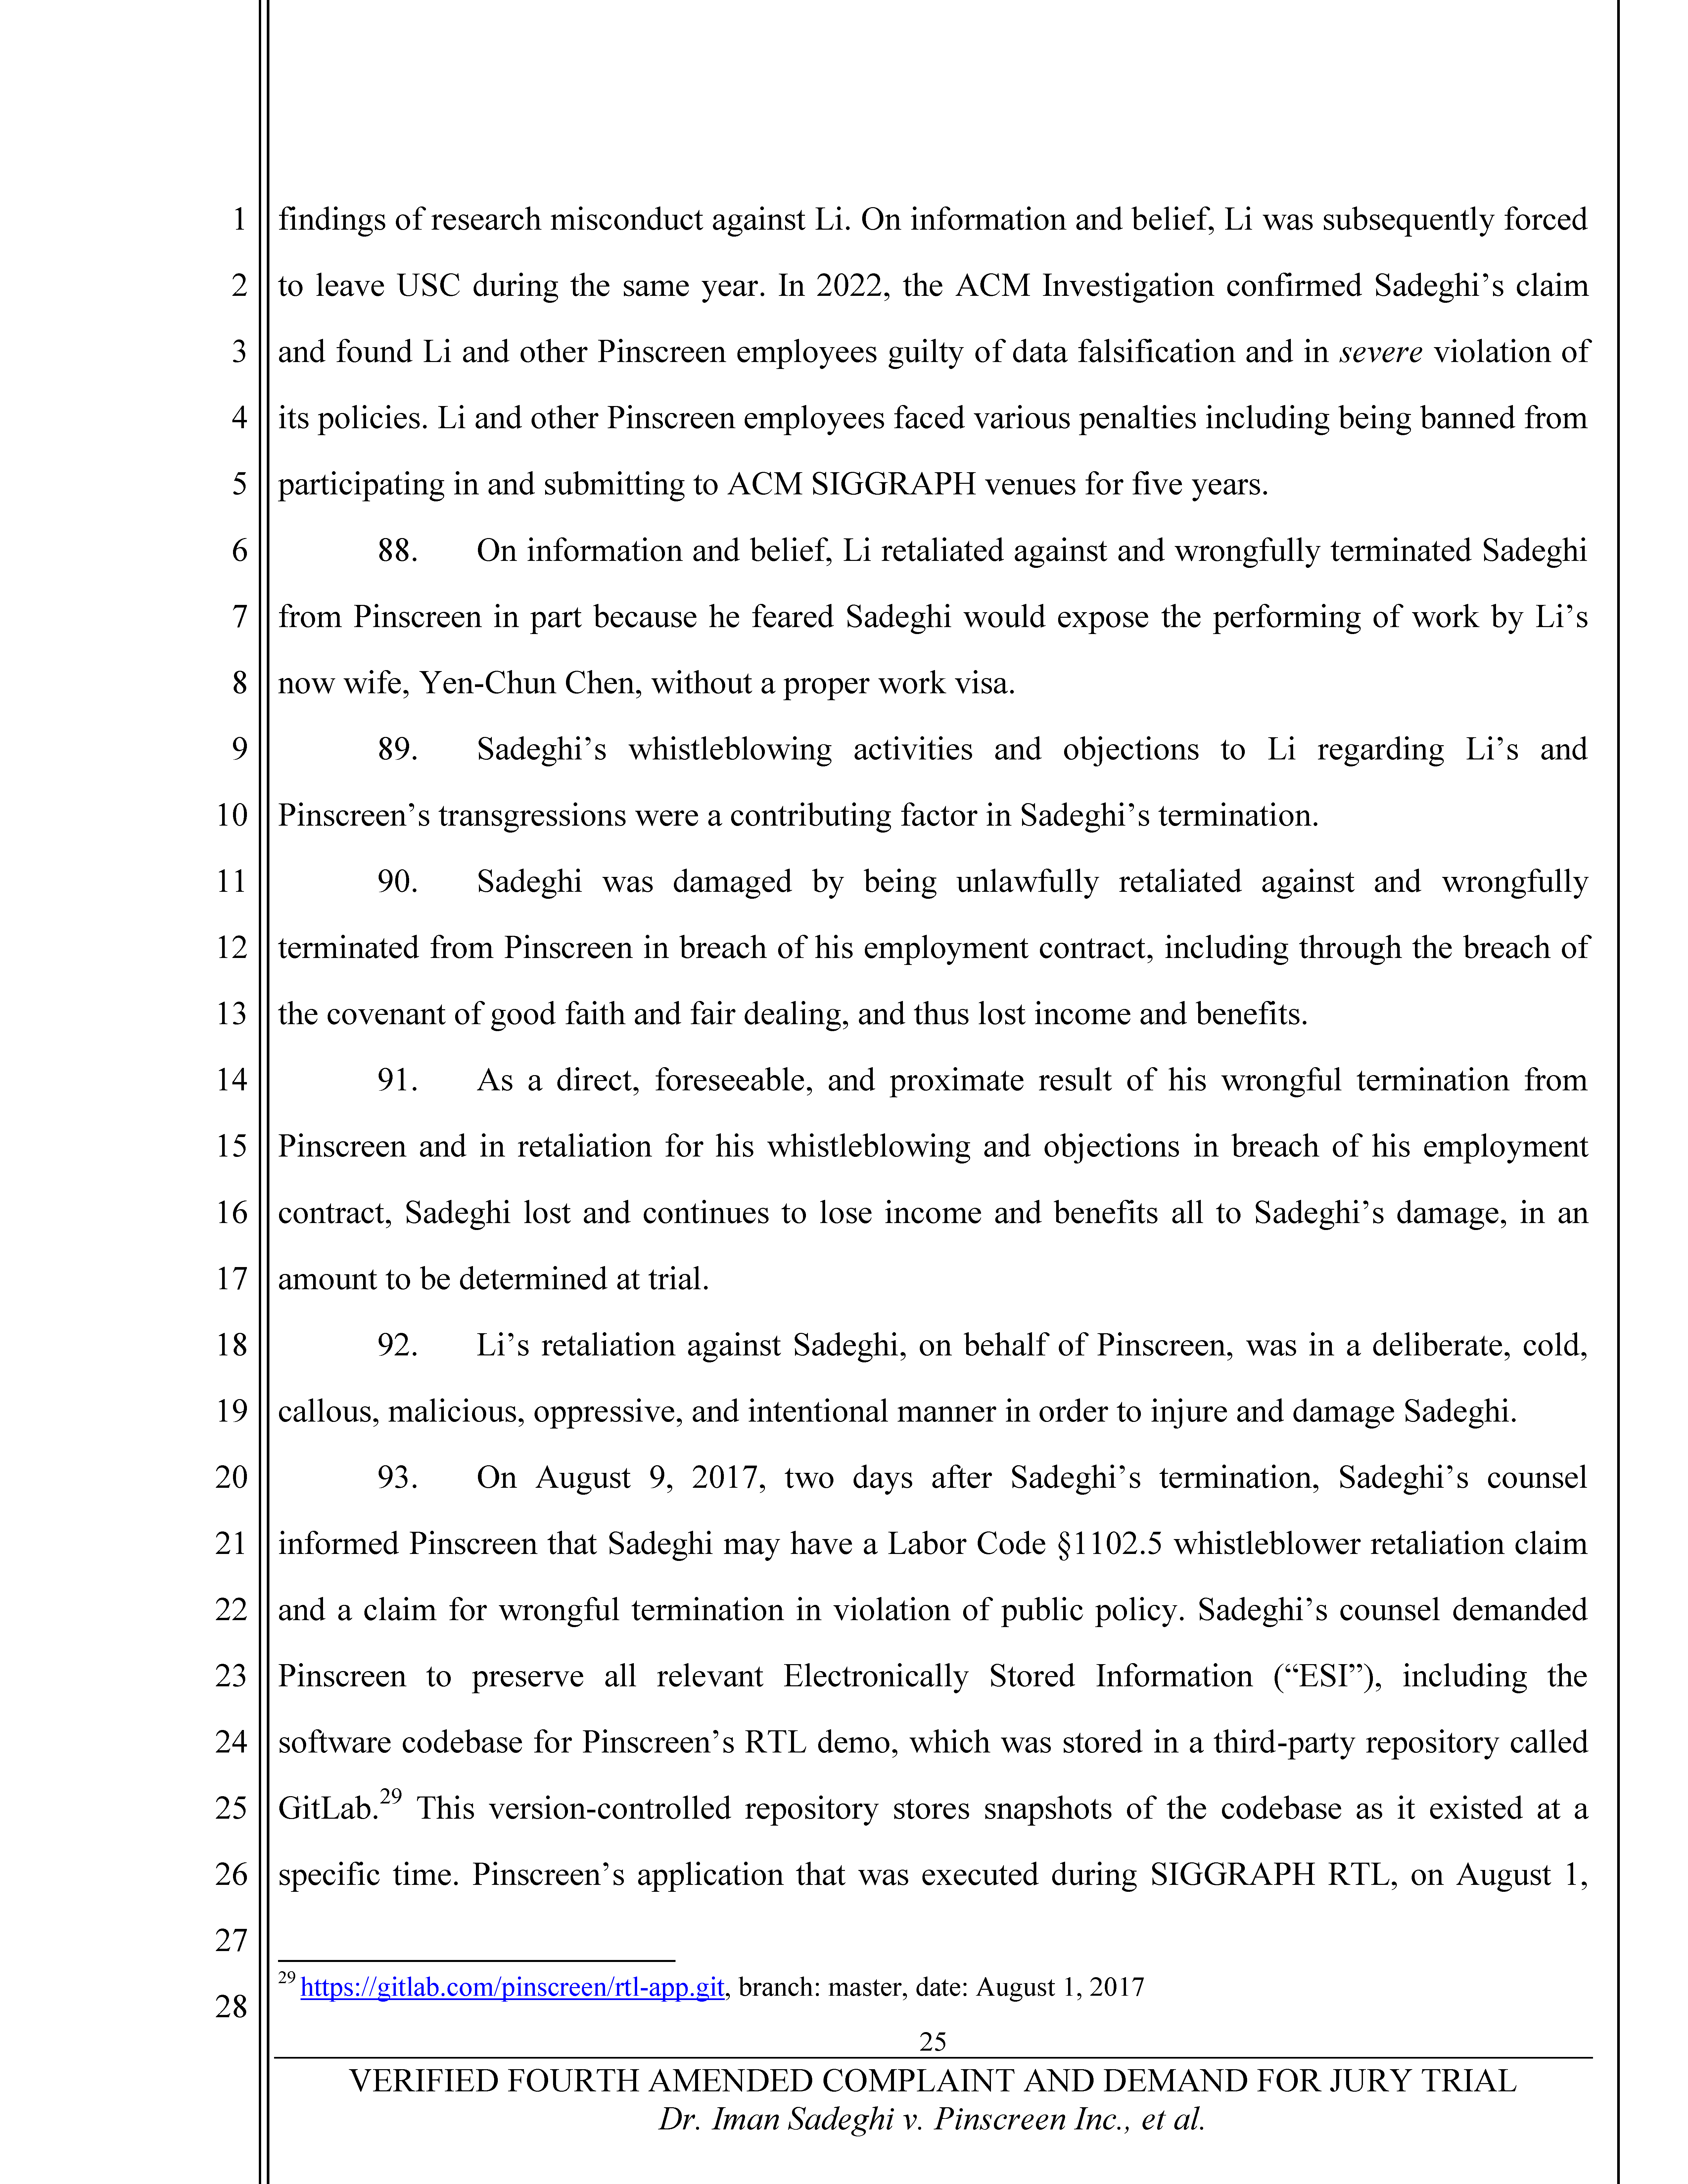 Fourth Amended Complaint (4AC) Page 26